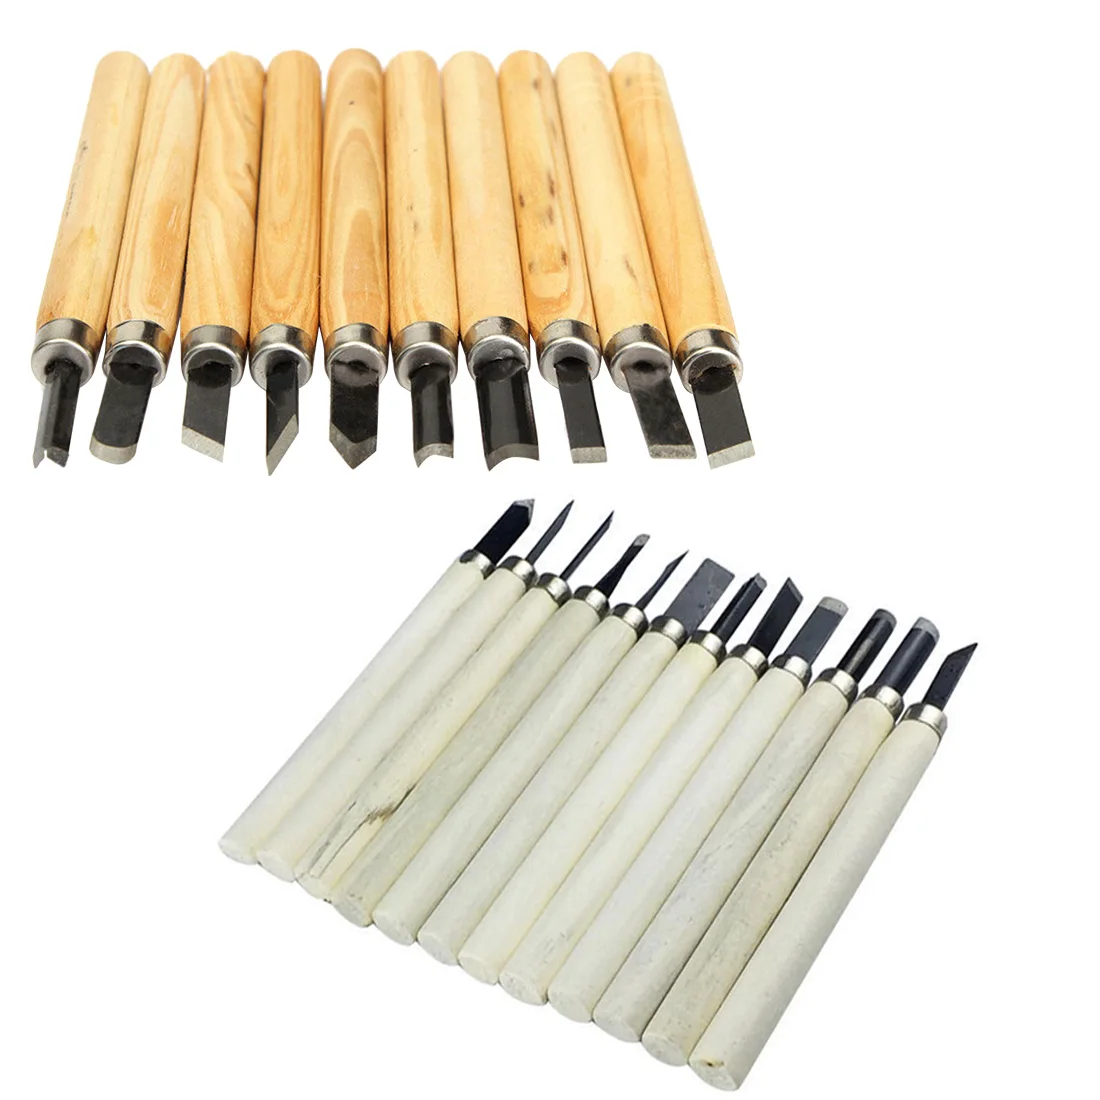 

10pcs/12pcs Hand Wood Carving Chisels Knife Tool for Basic Woodcut Working Clay Wax DIY Tools and Detailed Woodworking Hand Tool